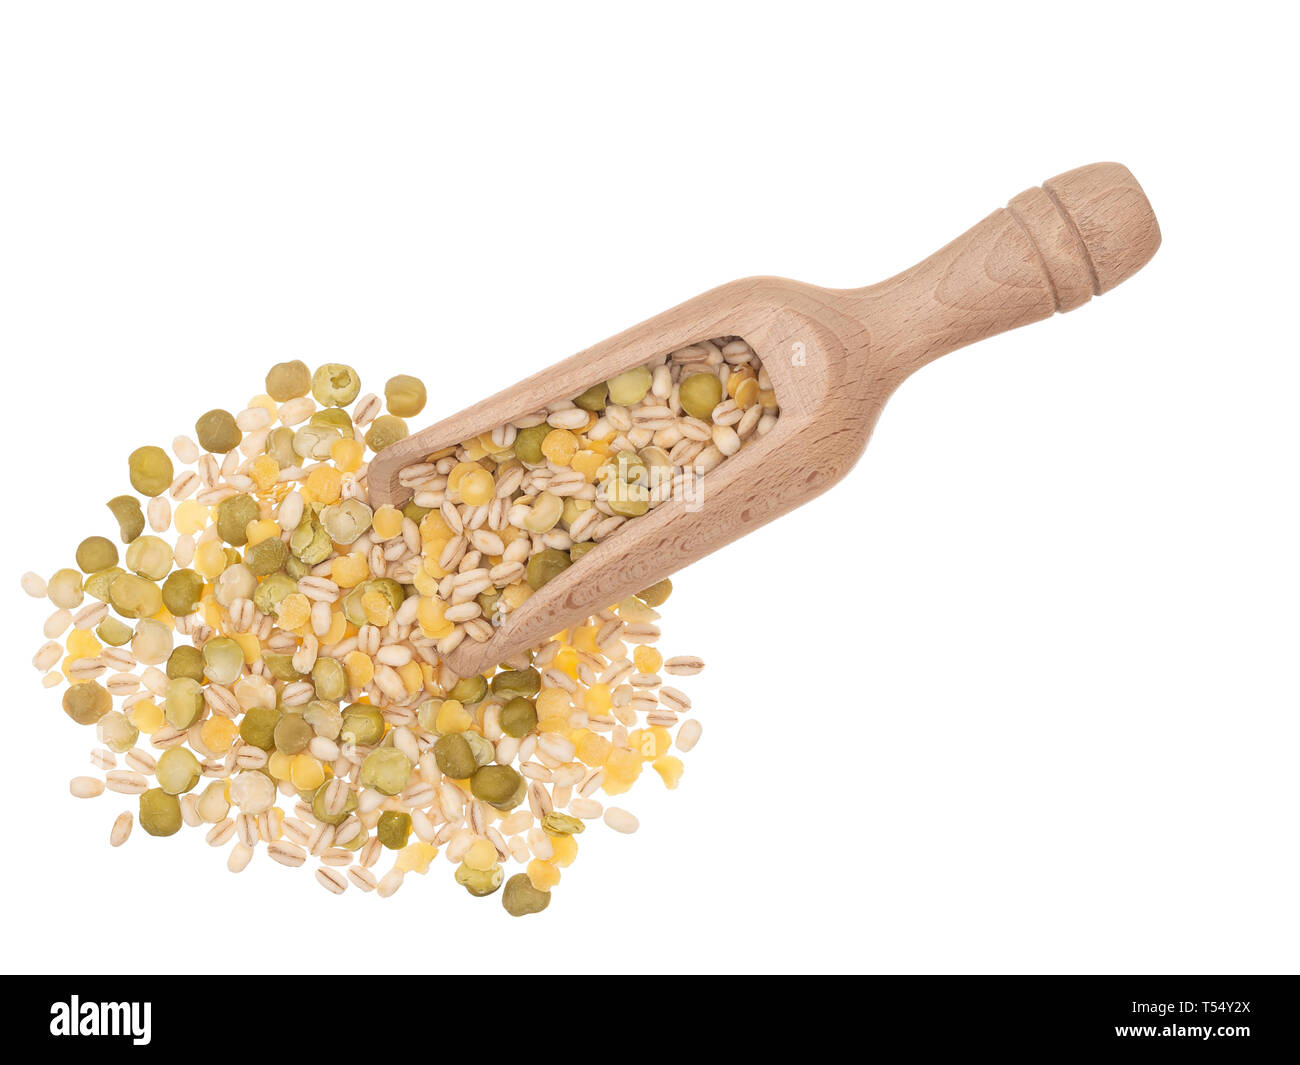 Pearl barley with beans, pulses. split green peas and yellow lentils. Healthy eating source of vitamins and fibre. With scoop, isolated on white. Stock Photo